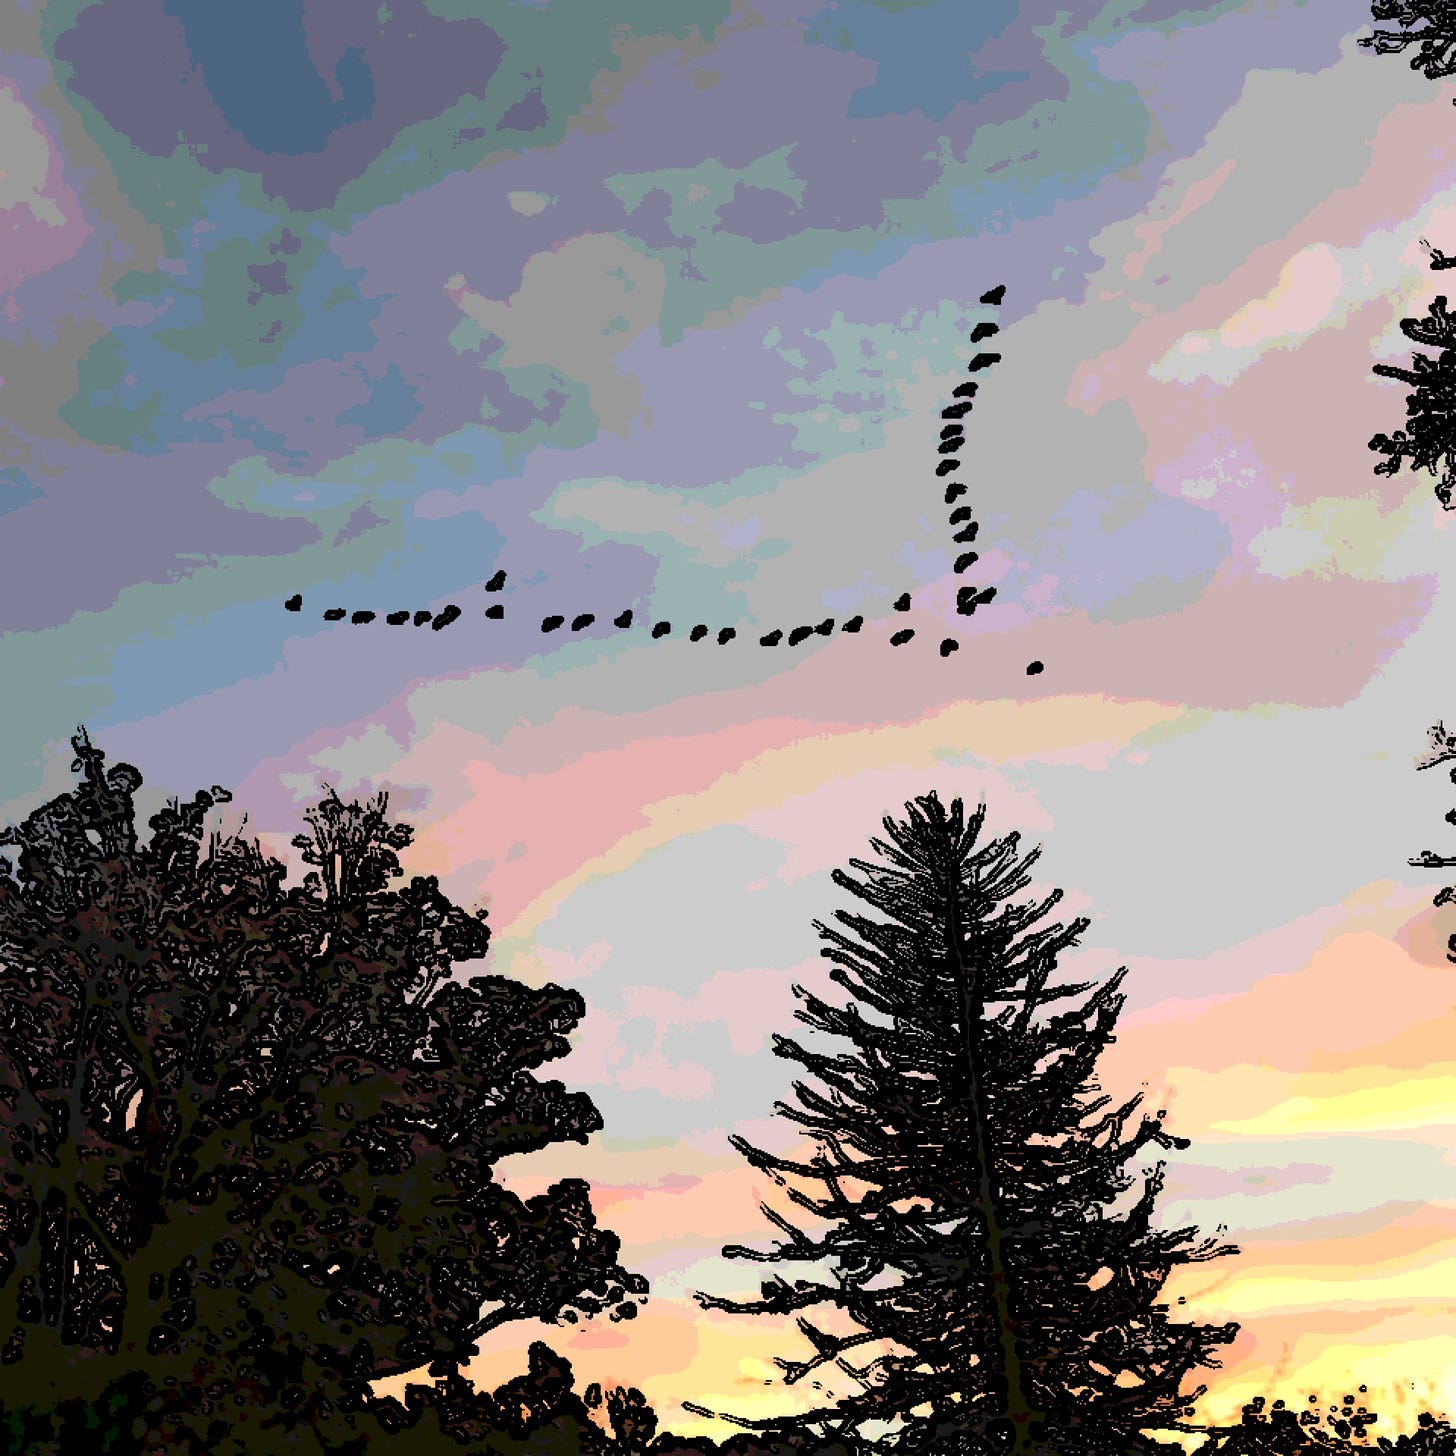 Birds flying in a V-formation against a sunset and above trees in profile. Photo is filtered to look like a cartoon.